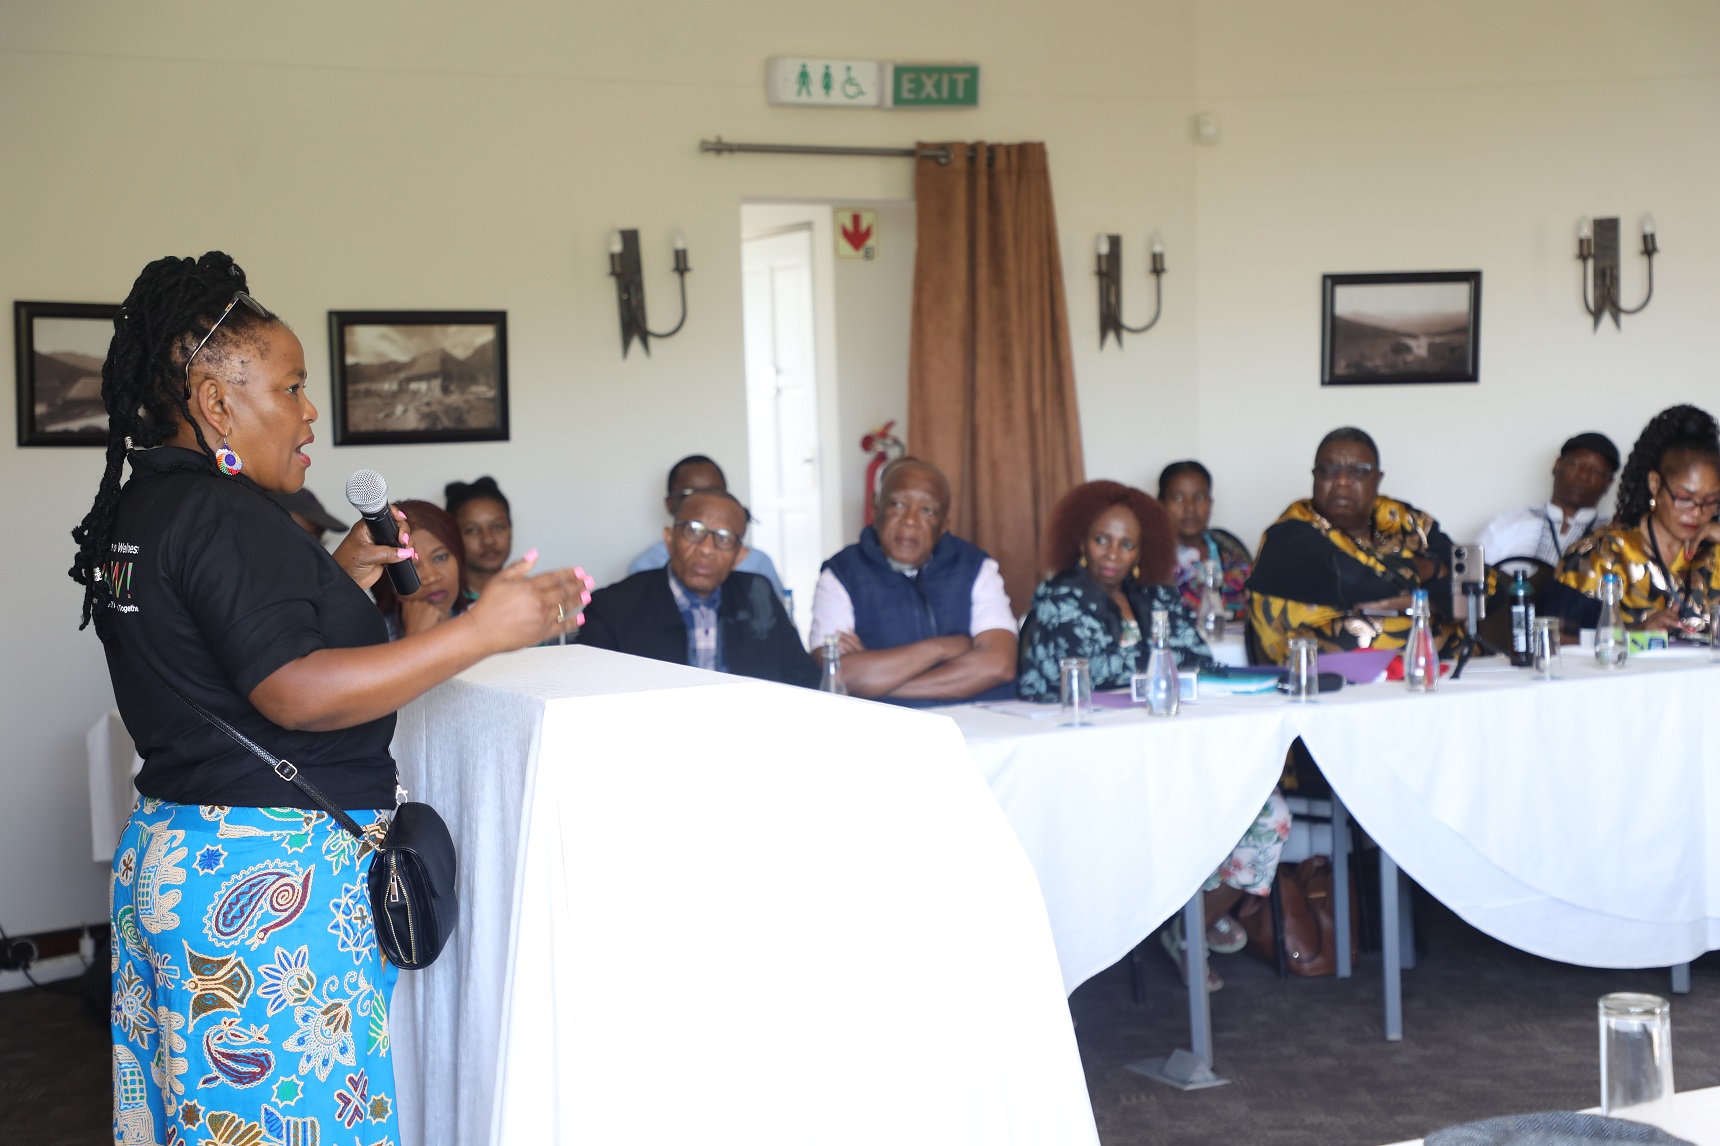 Minister Mbombo engaging the pastors on the holistic nature of wellness and the various factors that one’s wellbeing depends.